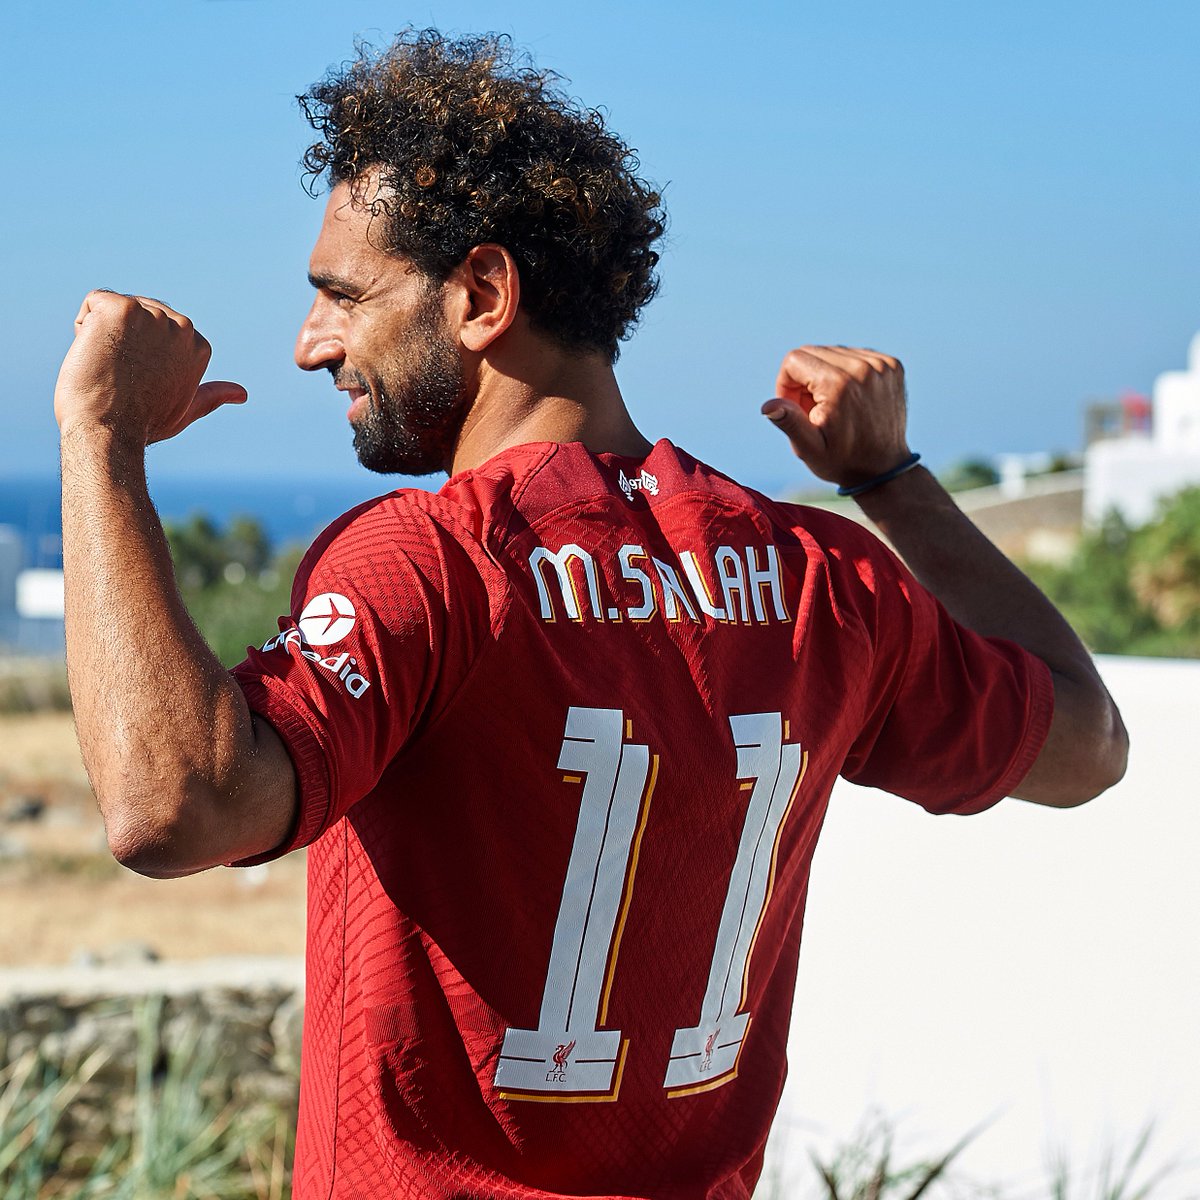 🇪🇬👑 Six trophies in five years! Salah at Liverpool: 

⚽️1⃣5⃣6⃣
🅰️0⃣5⃣8⃣
👕2⃣5⃣4⃣

🔴 #SalahStays 🔴

#UCL